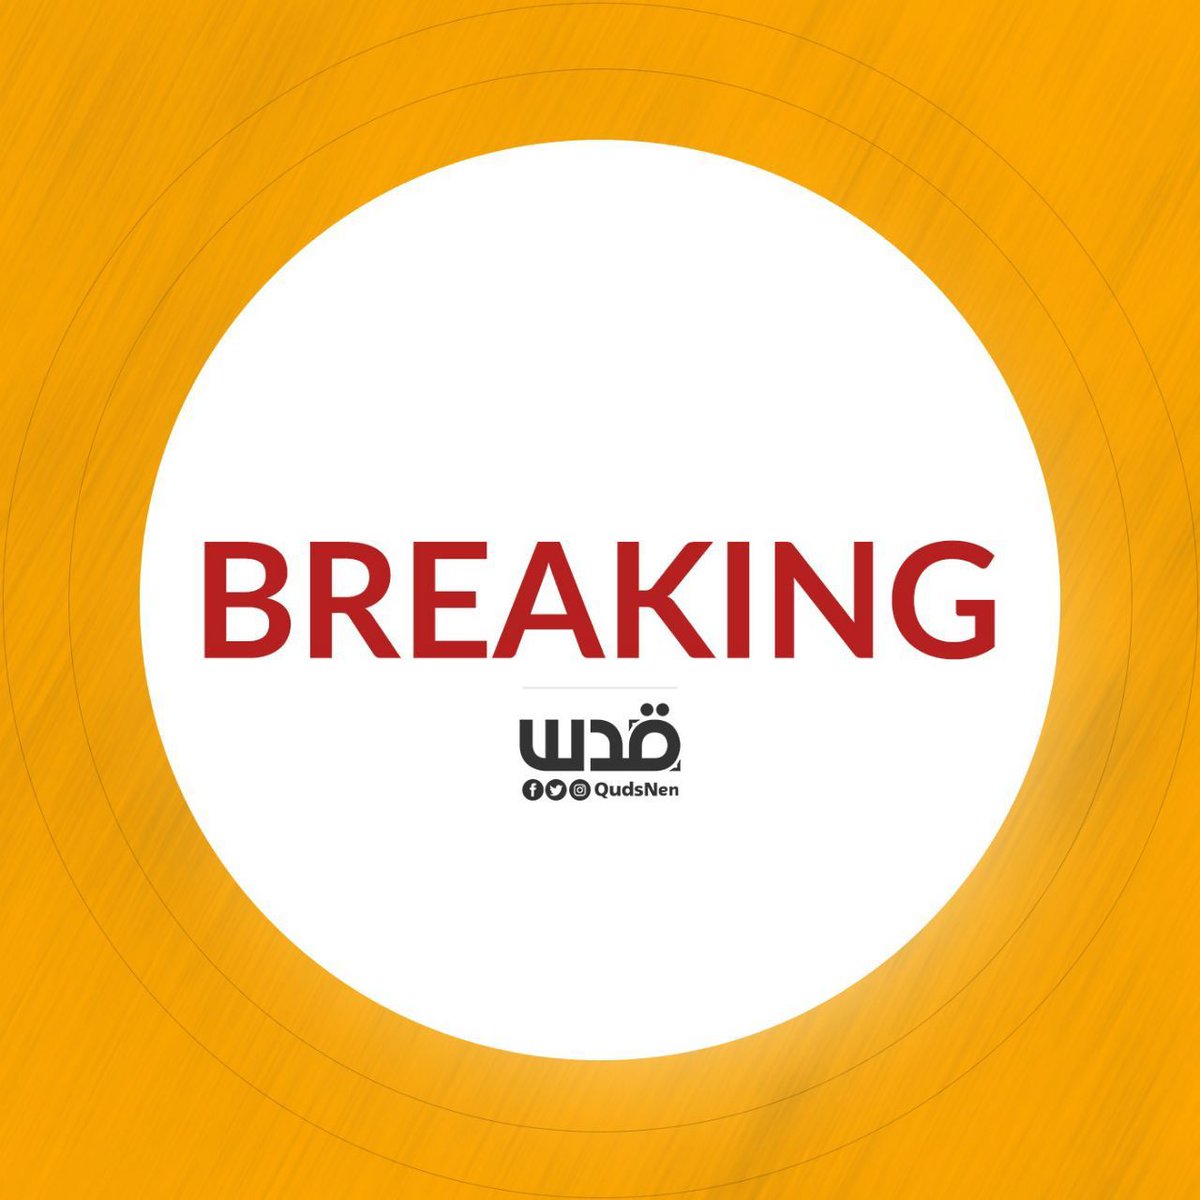 Breaking | The Prisoners' Affairs Commission and the Prisoners Club report that two prisoners from Gaza, including Dr. Adnan Ahmed Al-Birsh, head of the orthopedic department at Al-Shifa Hospital, have been martyred while in Israeli occupation detention.